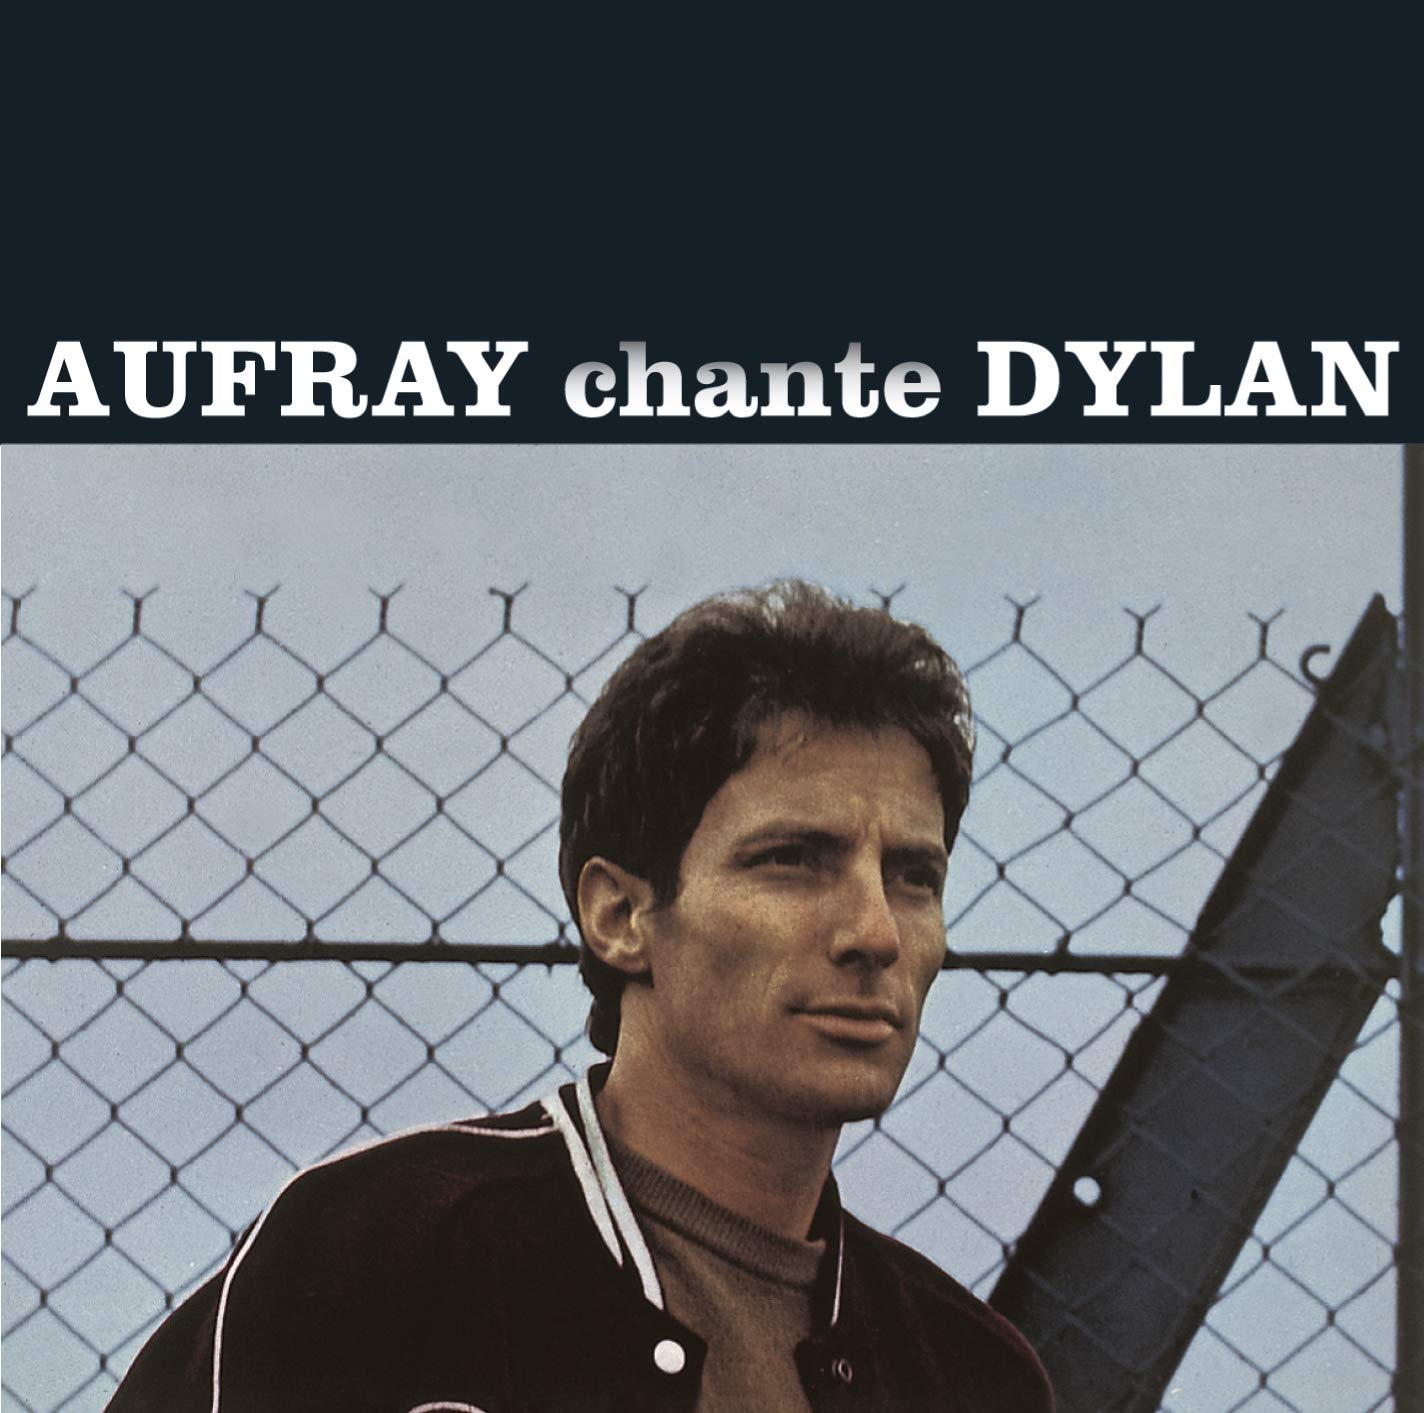 hugues aufray - Aufray chante Dylan